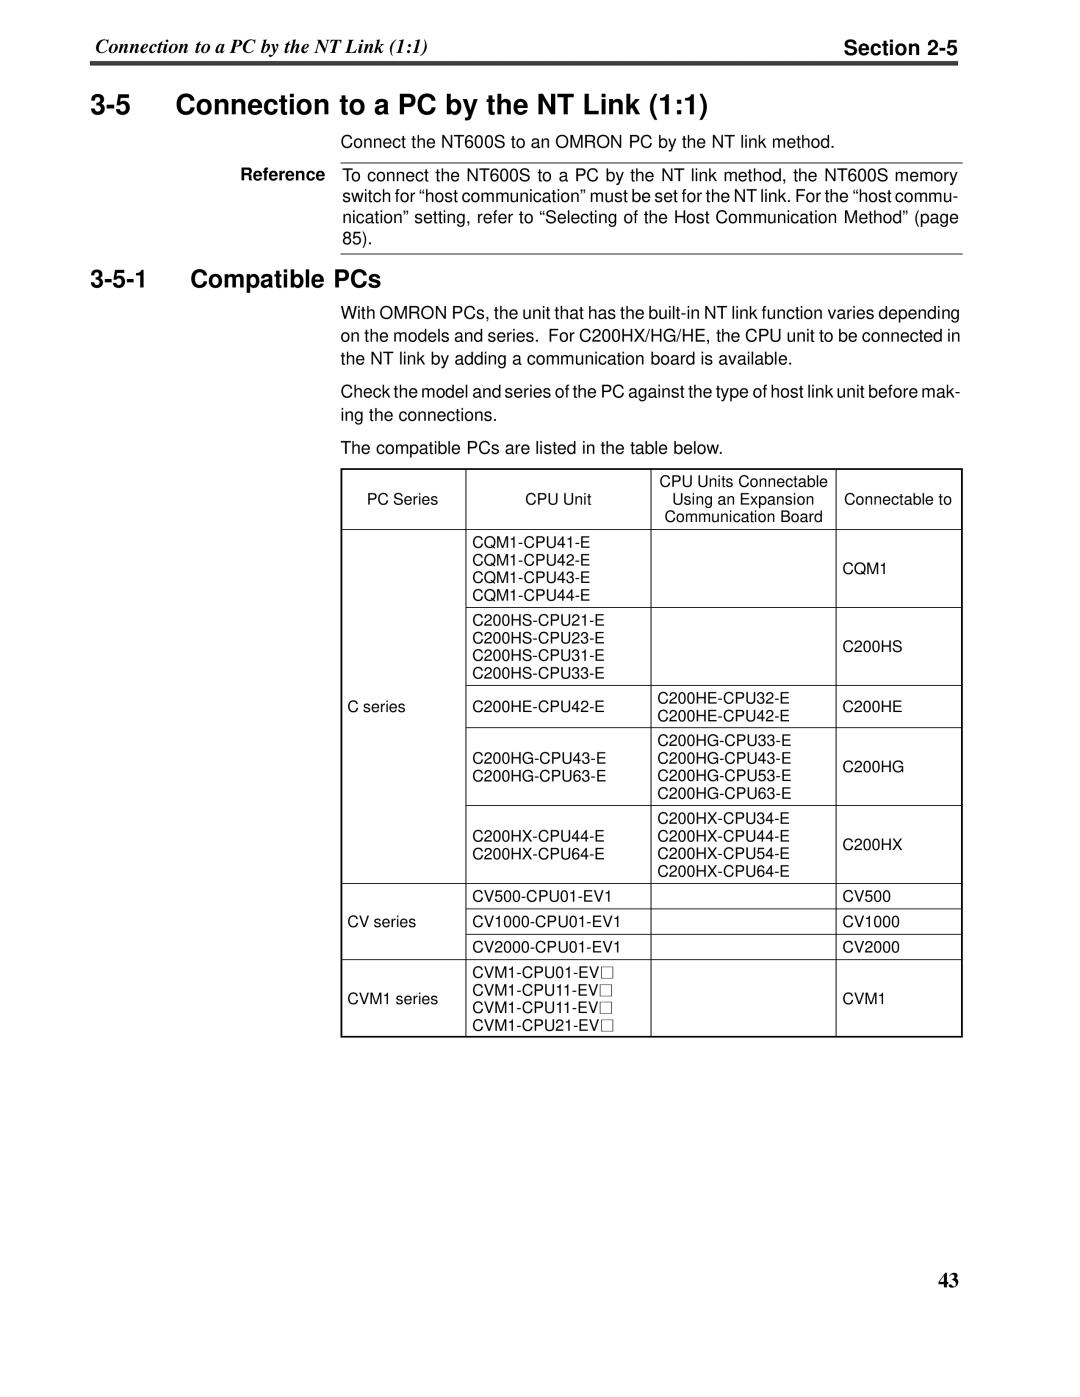 Omron V022-E3-1 operation manual 3-5Connection to a PC by the NT Link 1:1, 3-5-1Compatible PCs, Section 